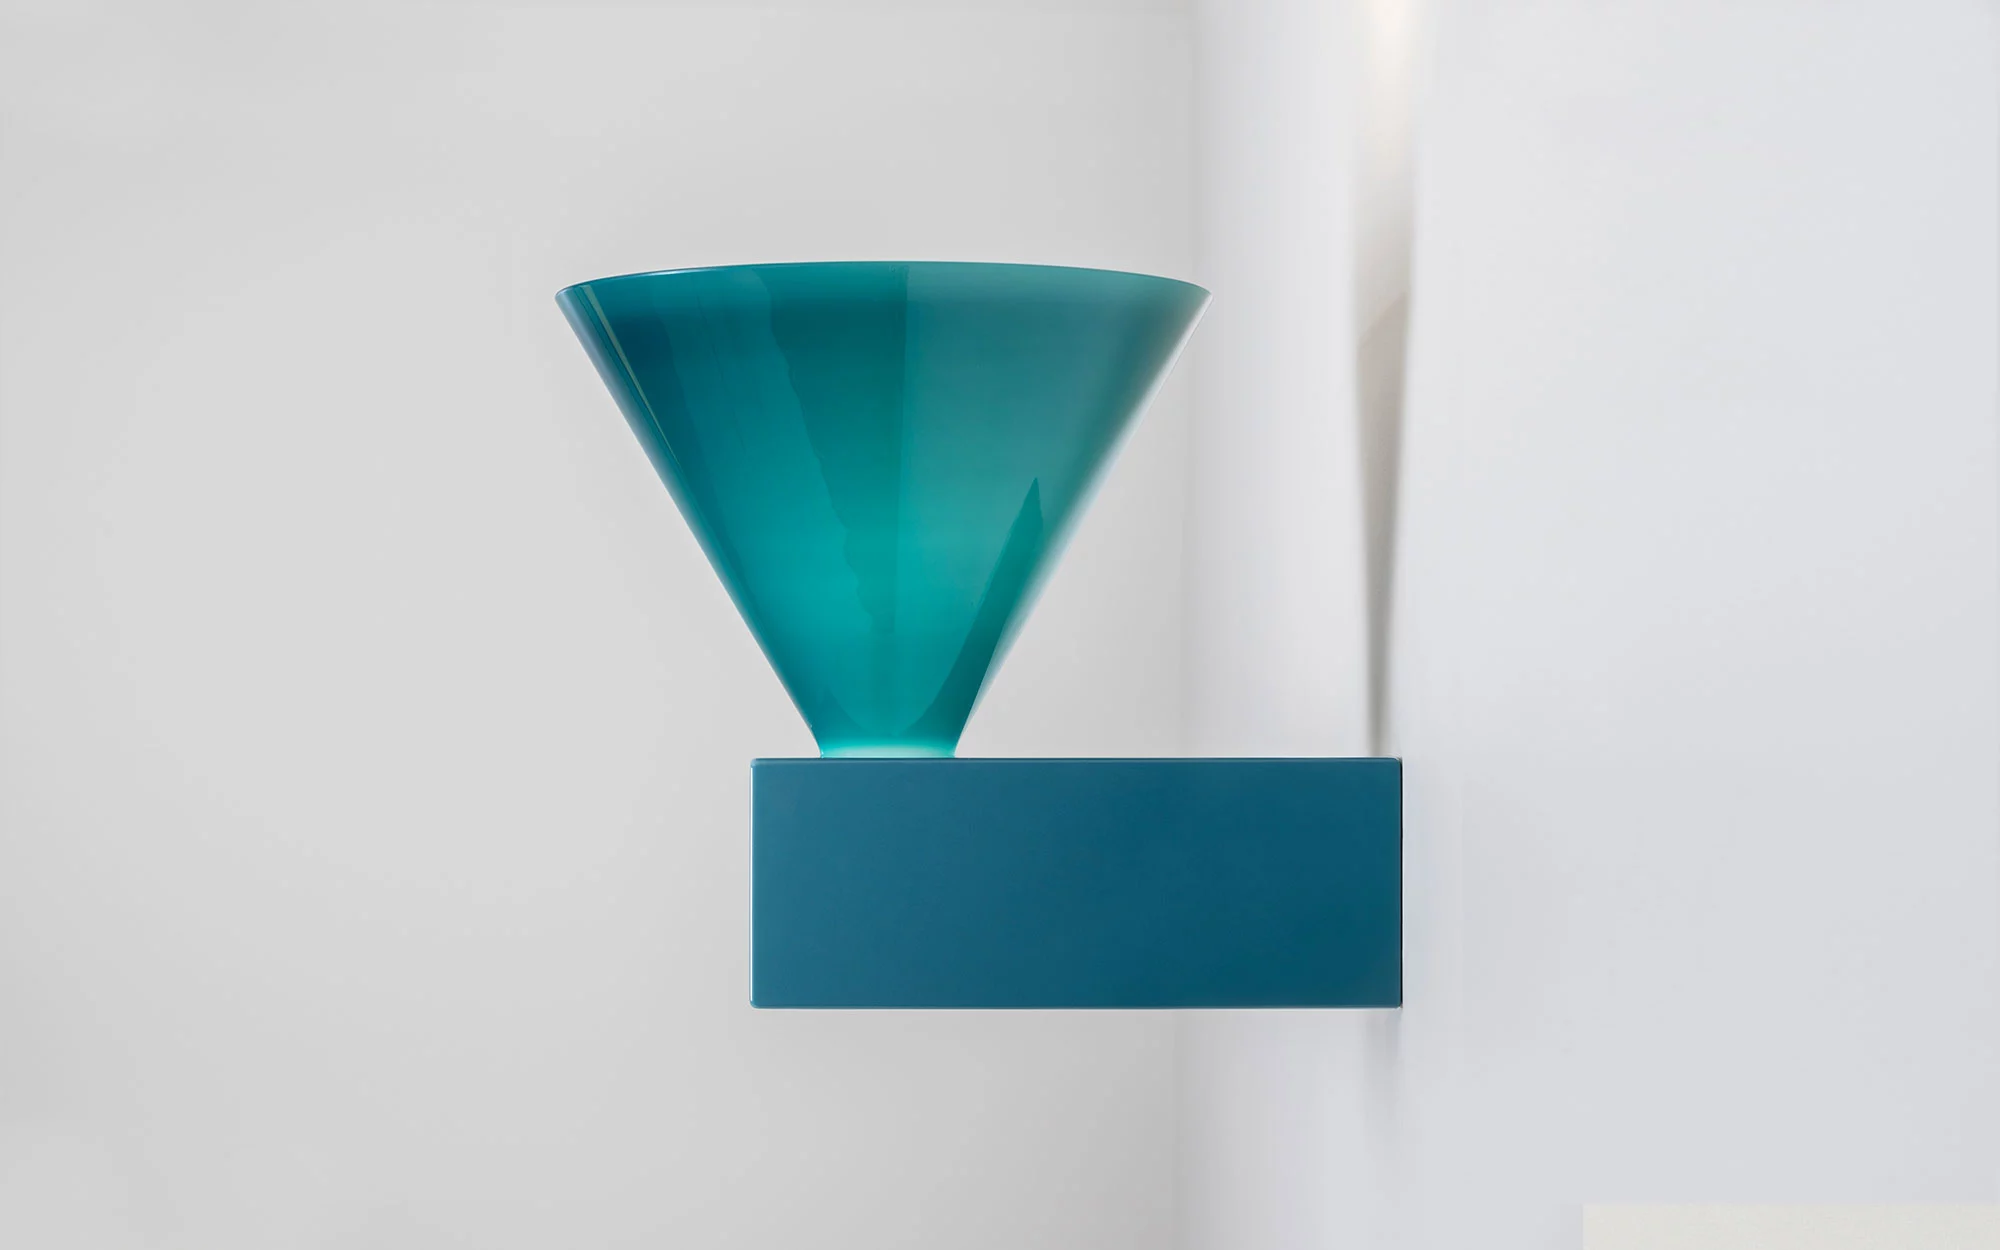 Signal W MONOCHROMATIC - Edward Barber and Jay Osgerby - Miscellaneous - Galerie kreo